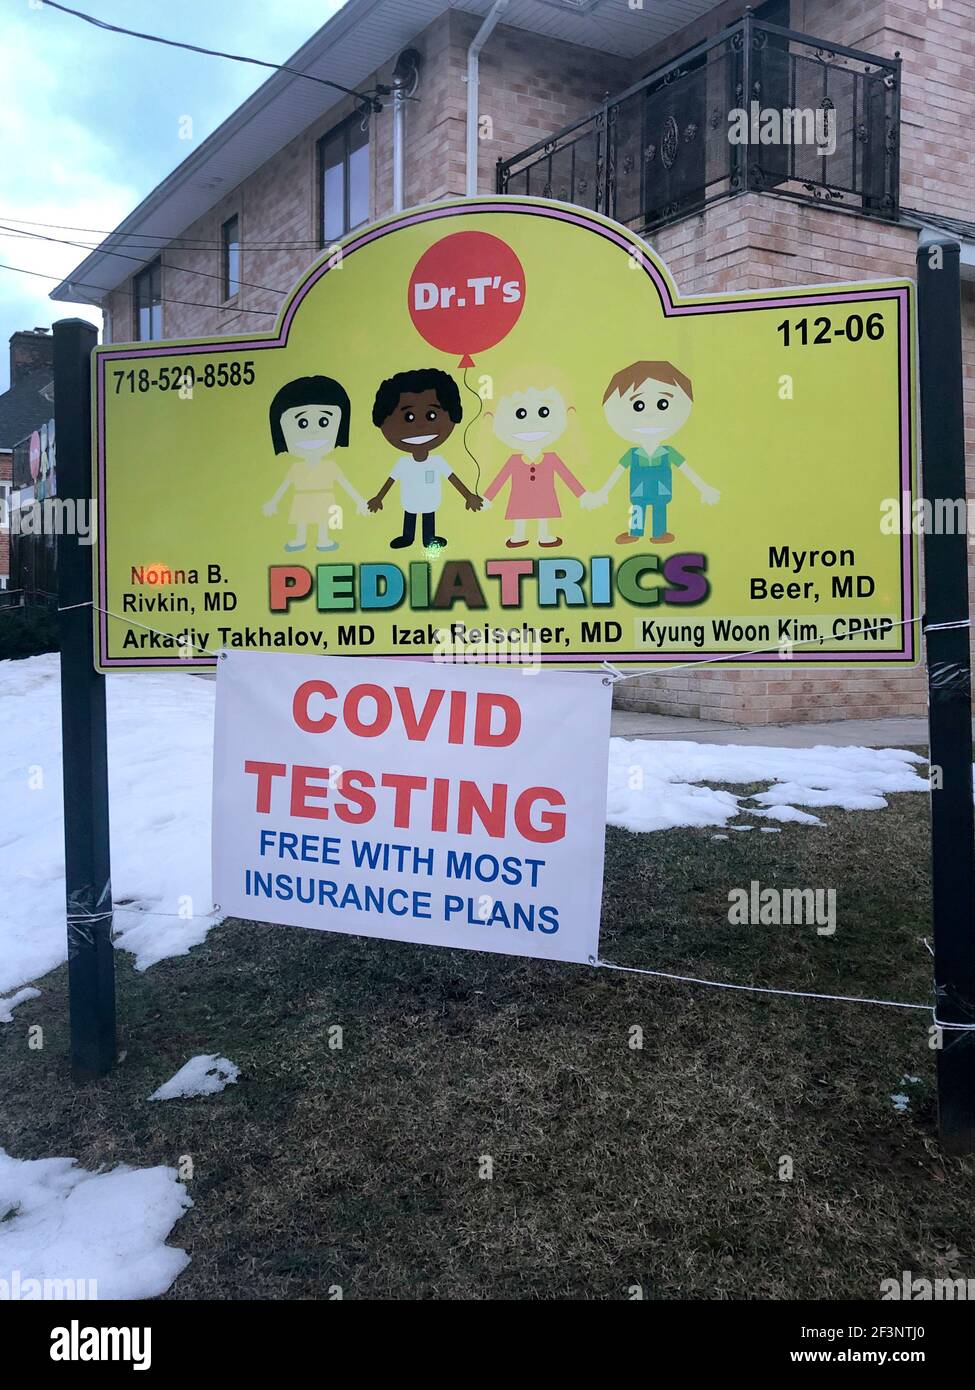 Covid Testing sign at Dr. T's Pediatrics, Queens, New York Stock Photo